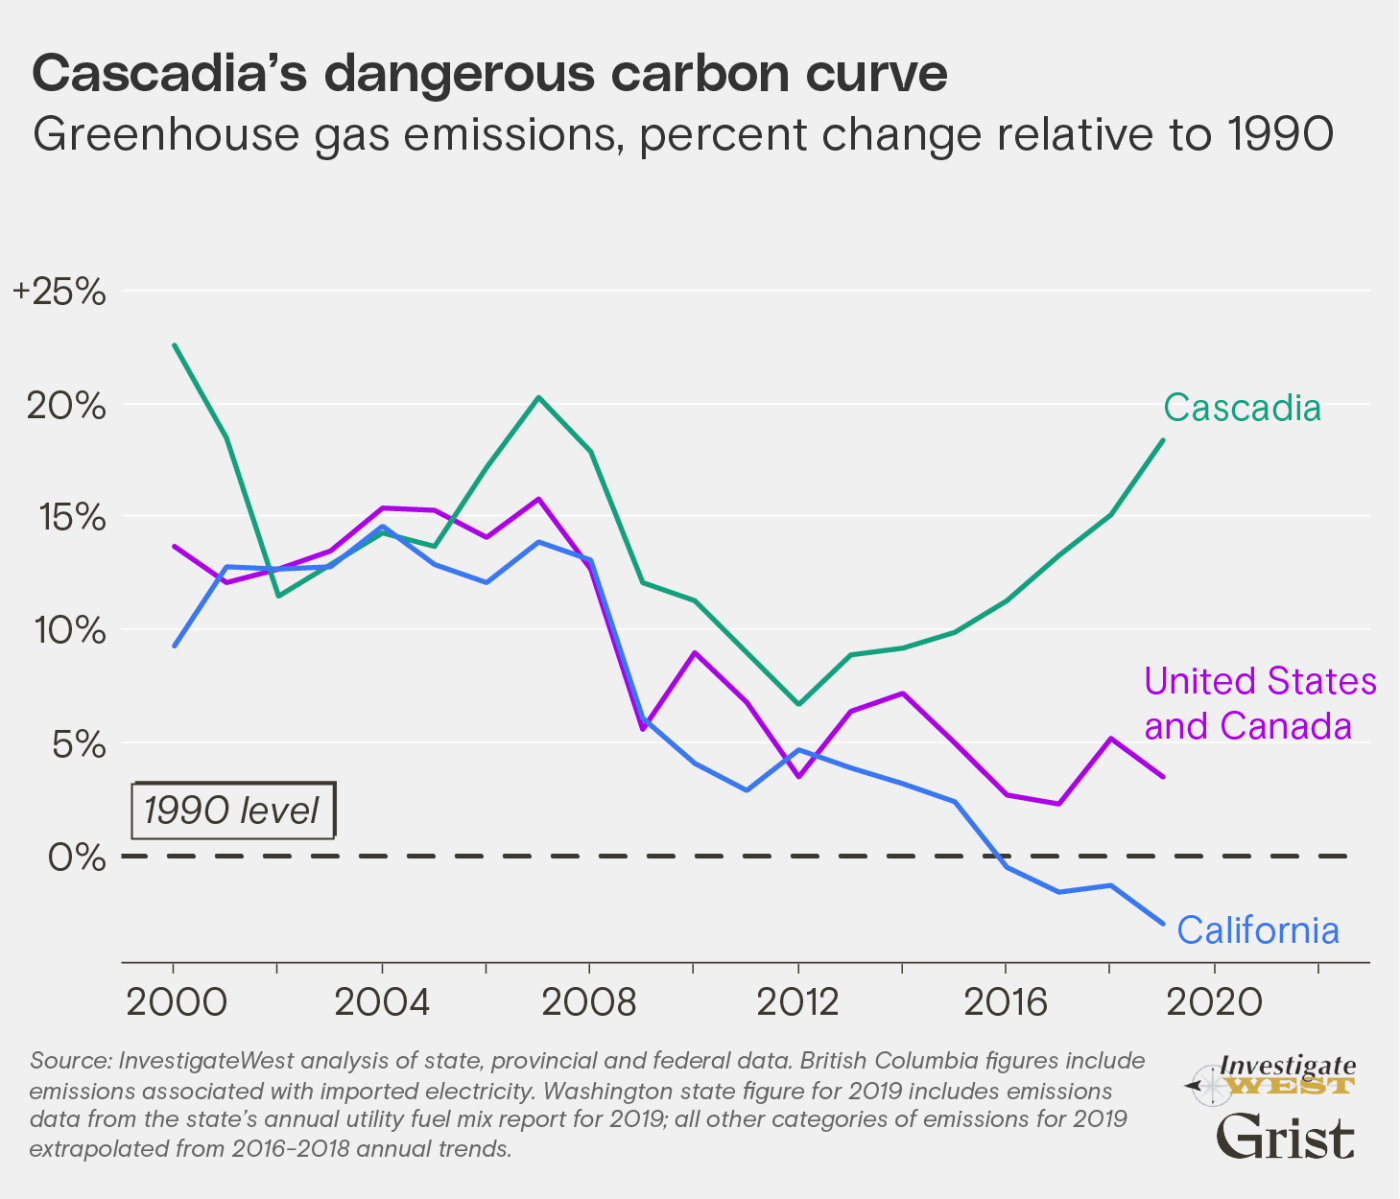 A chart showing an increase in the percent change of greenhous gas emissions in Cascadia, relative to 1990. The chart also shows in a decrease for California and the U.S. and Canada as a whole.